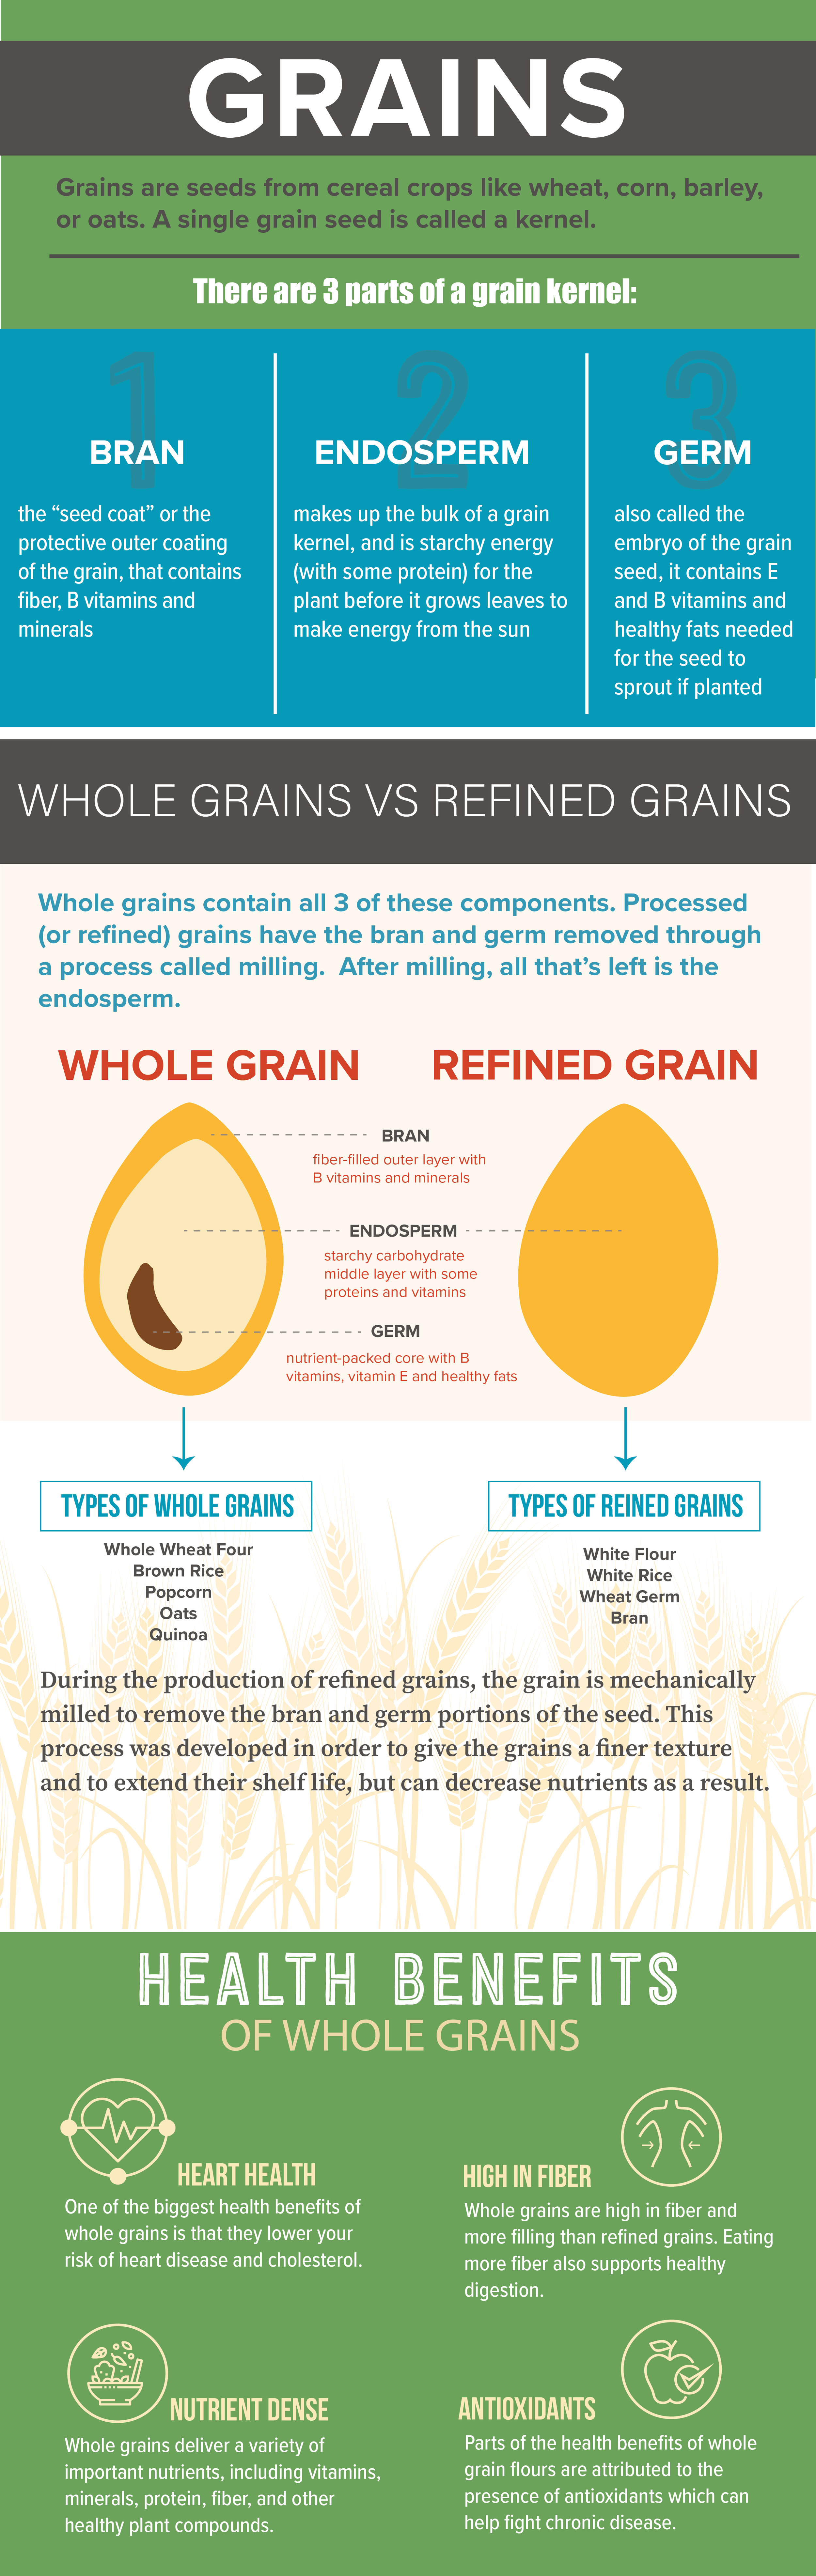 Benefits of whole grains for heart health